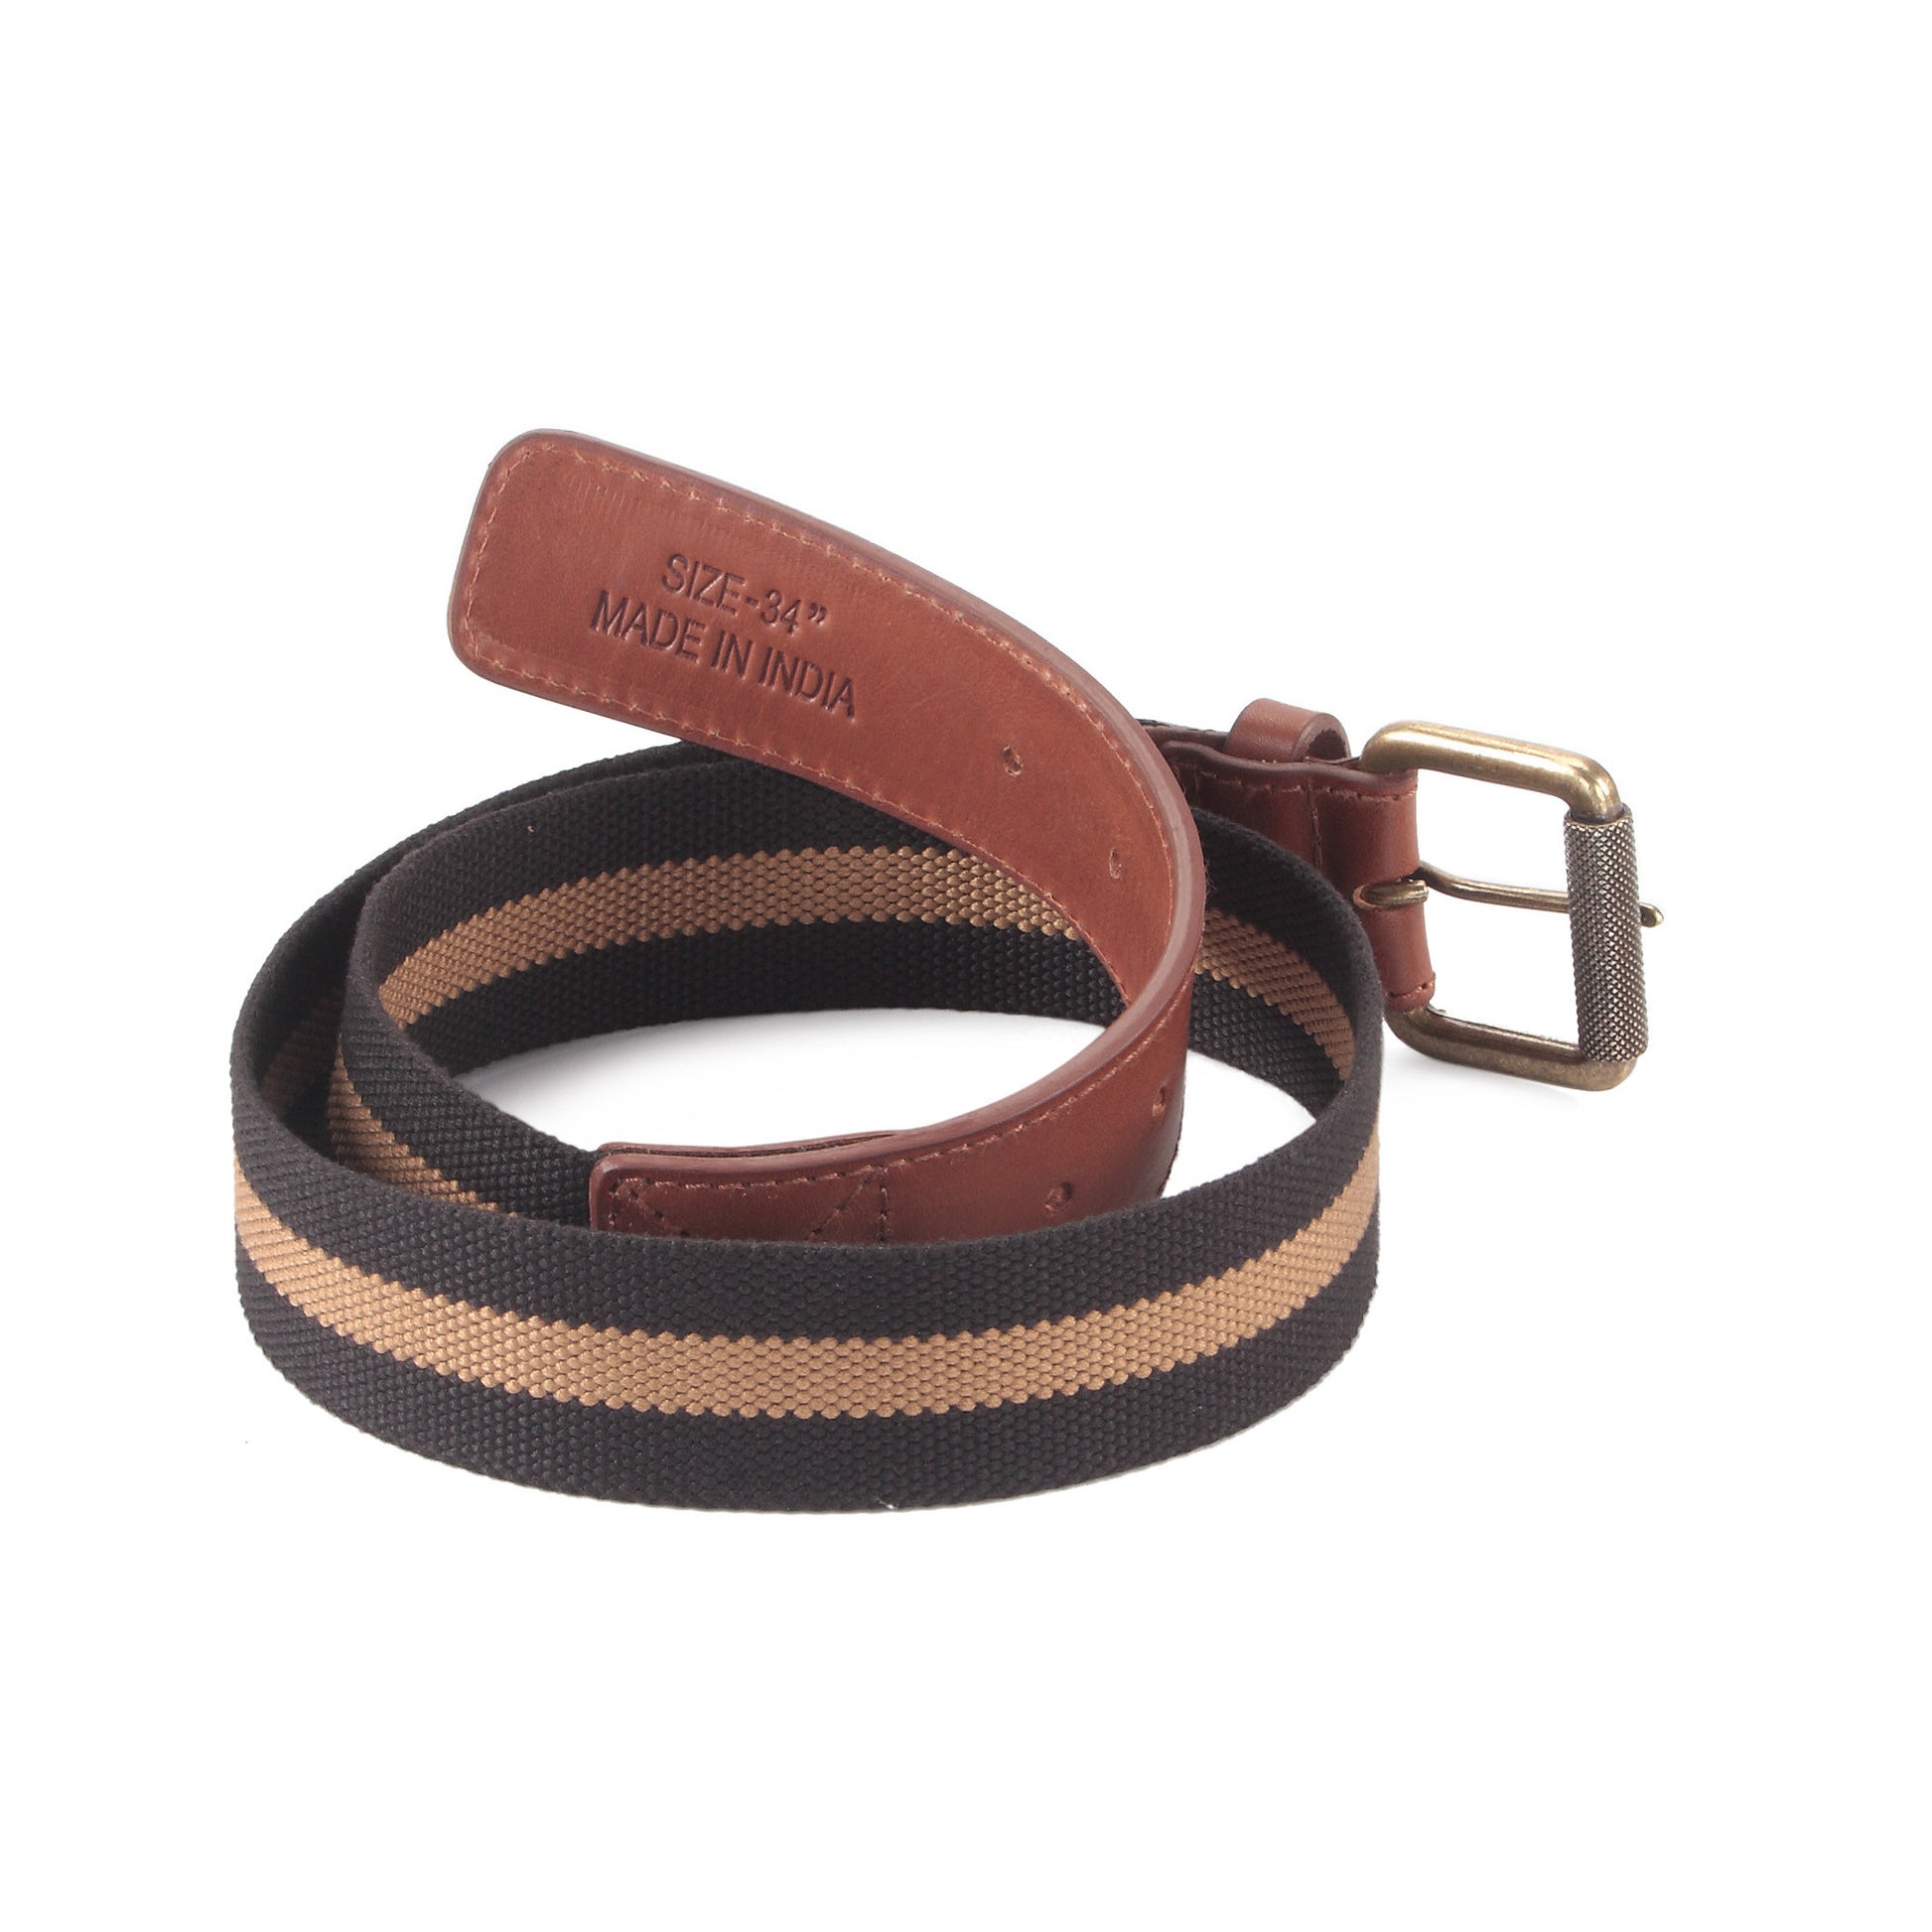 390343 - One and a Half Inch Wide Leather Webbing Combination Belt - brandy / tan color leather - back view